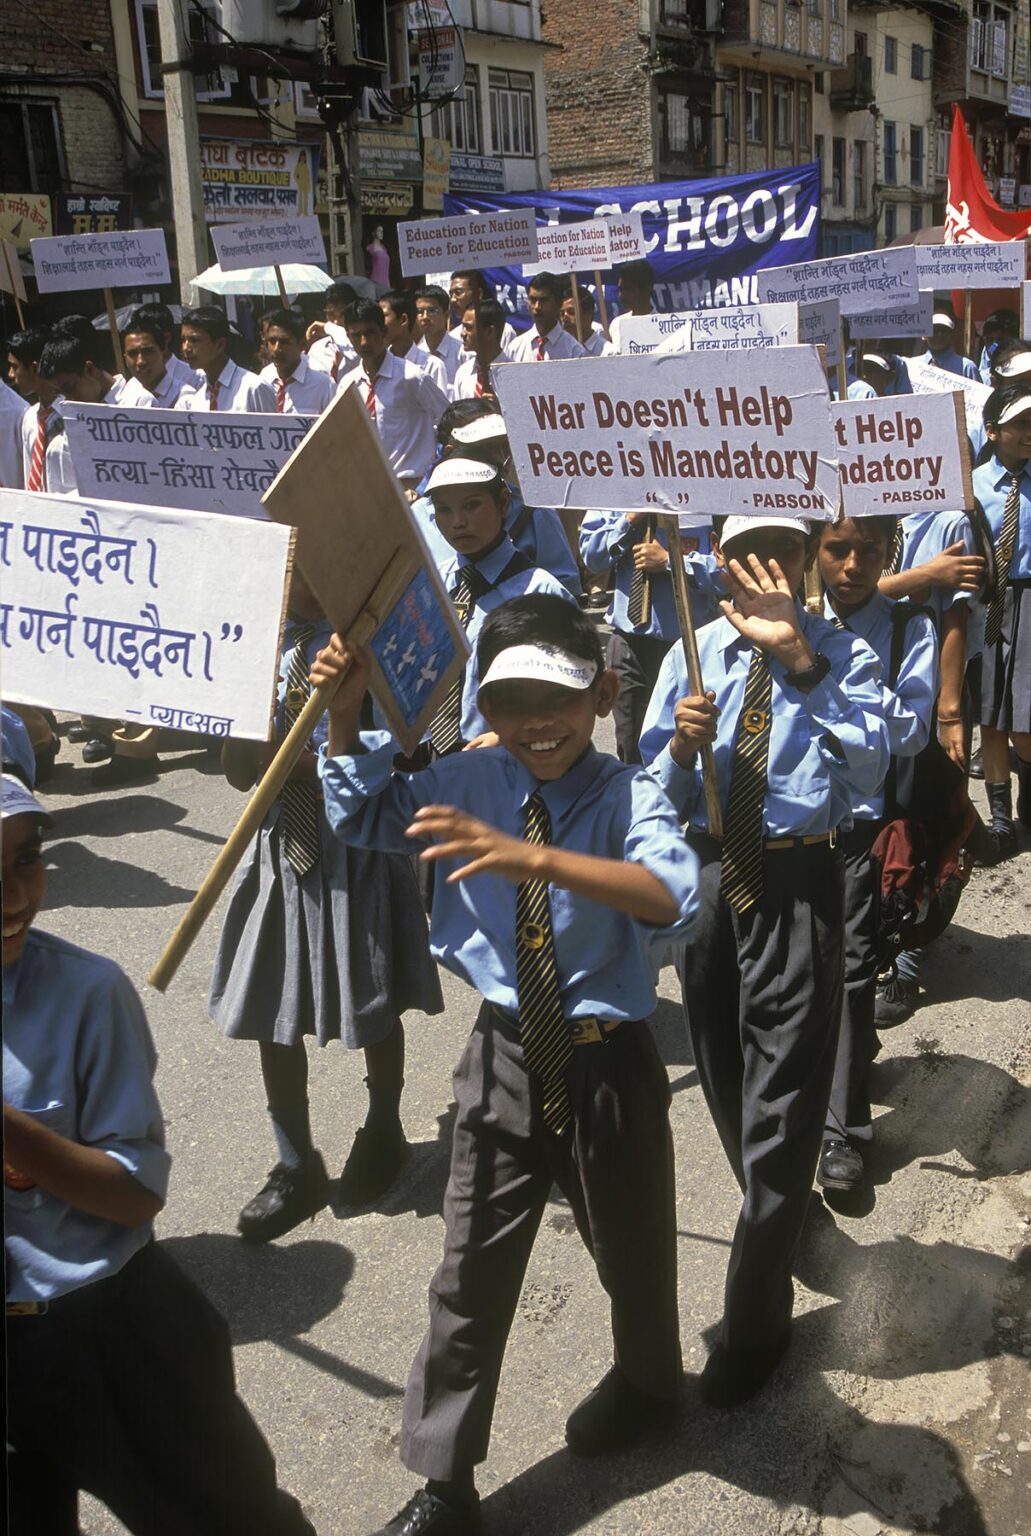 School children march in large PEACE RALLY protesting the violence caused by the MAOIST REBELLION - KATHAMANDU, NEPAL